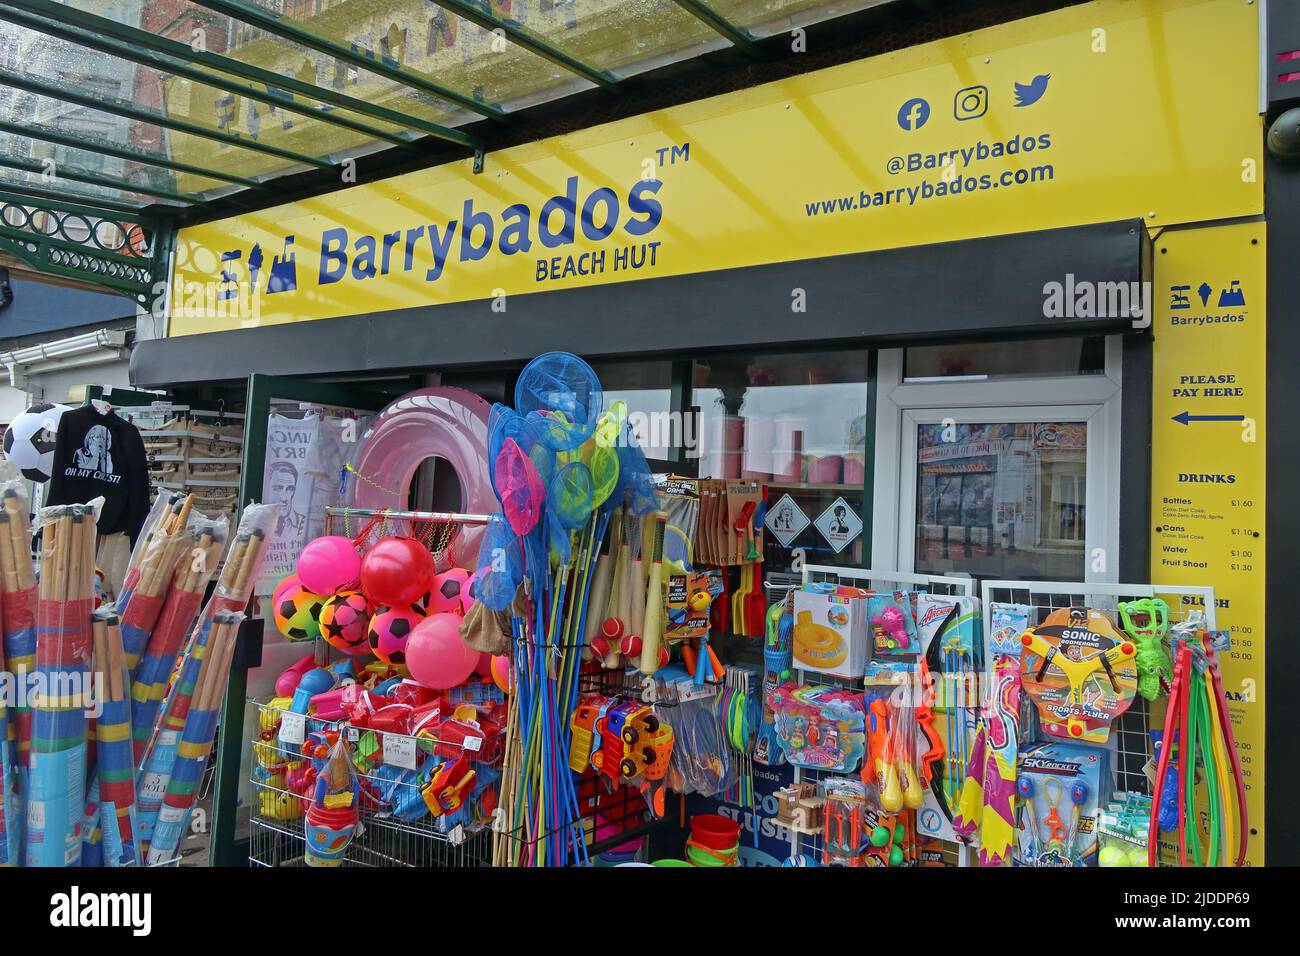 The yellow Barrybados beach hut shop, 1 Paget Rd, Barry, Cardiff, Vale Of Glamorgan, Wales, UK,   CF62 5TQ Stock Photo